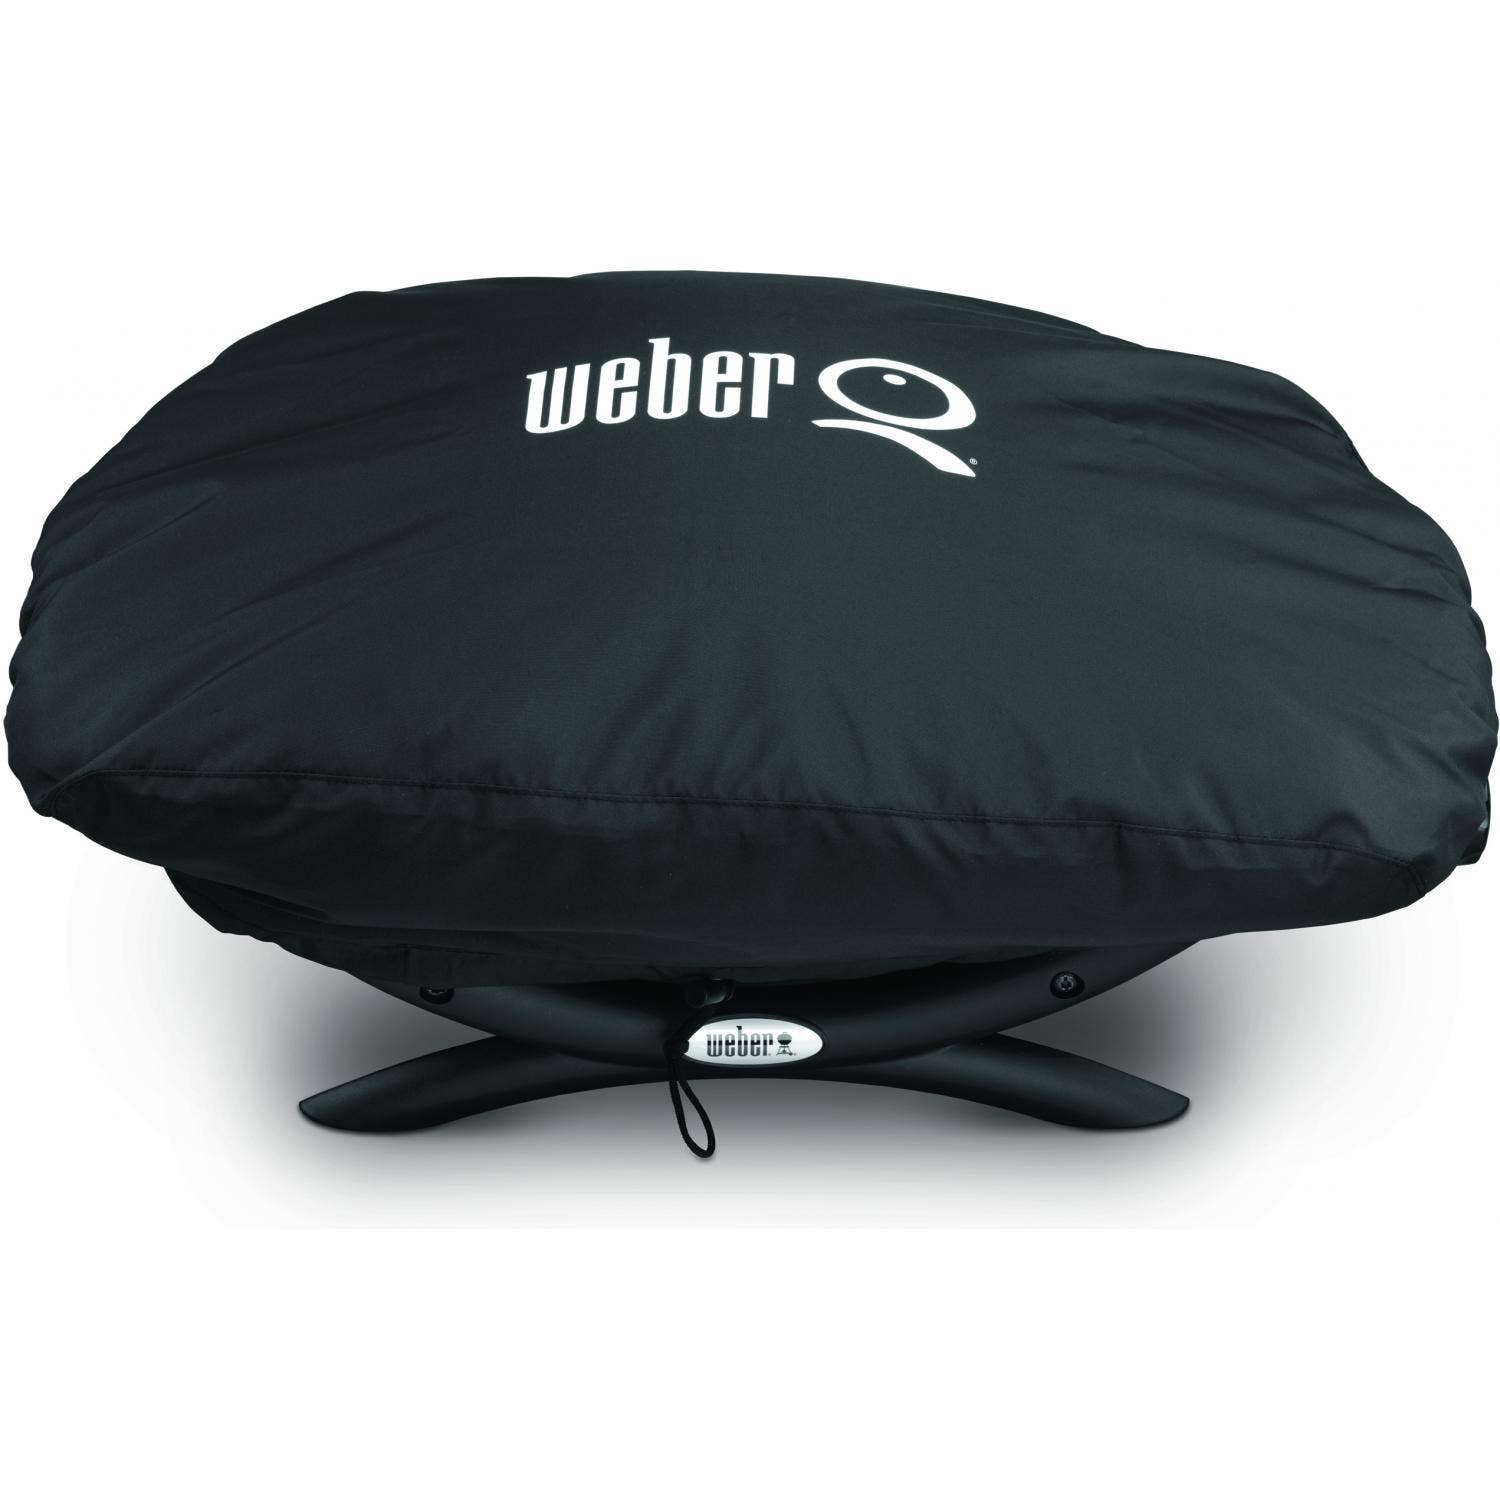 Weber Q Grill Cover for Q 100 and 1000 Series Gas Grills, 7110 Outdoor Grill Covers 12032444